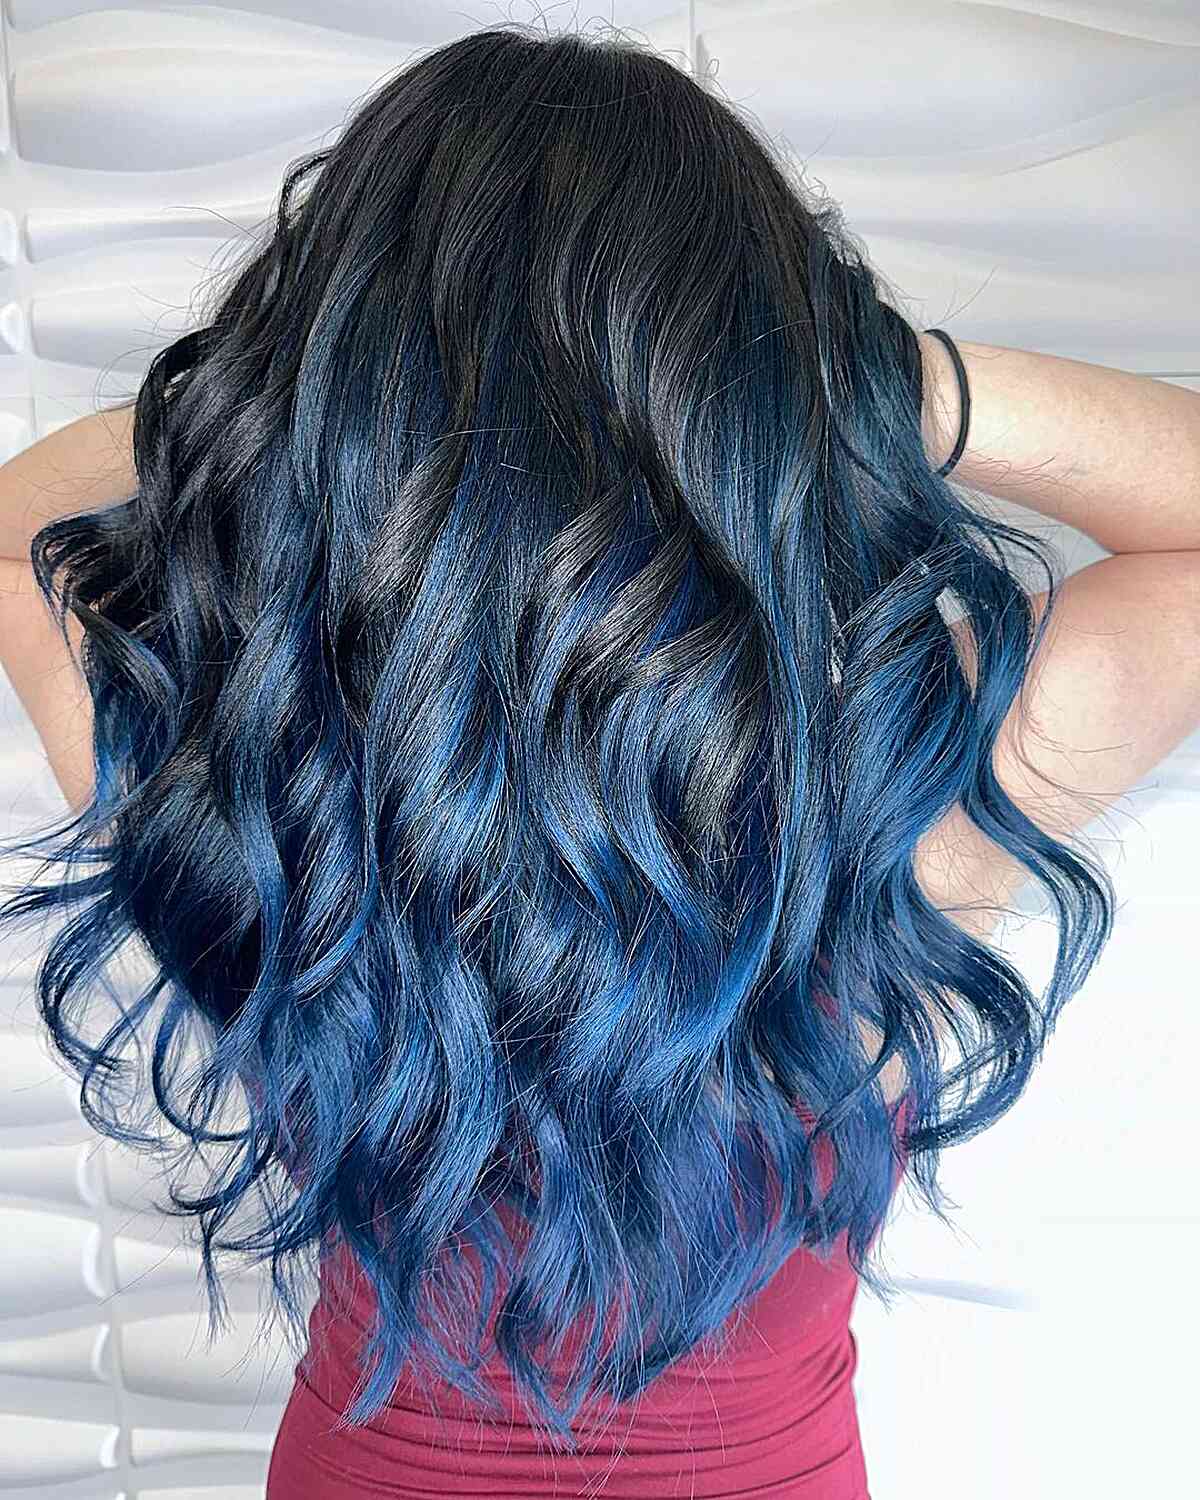 Cobalt Blue Balayage with Black Roots for Long Layers and Waves